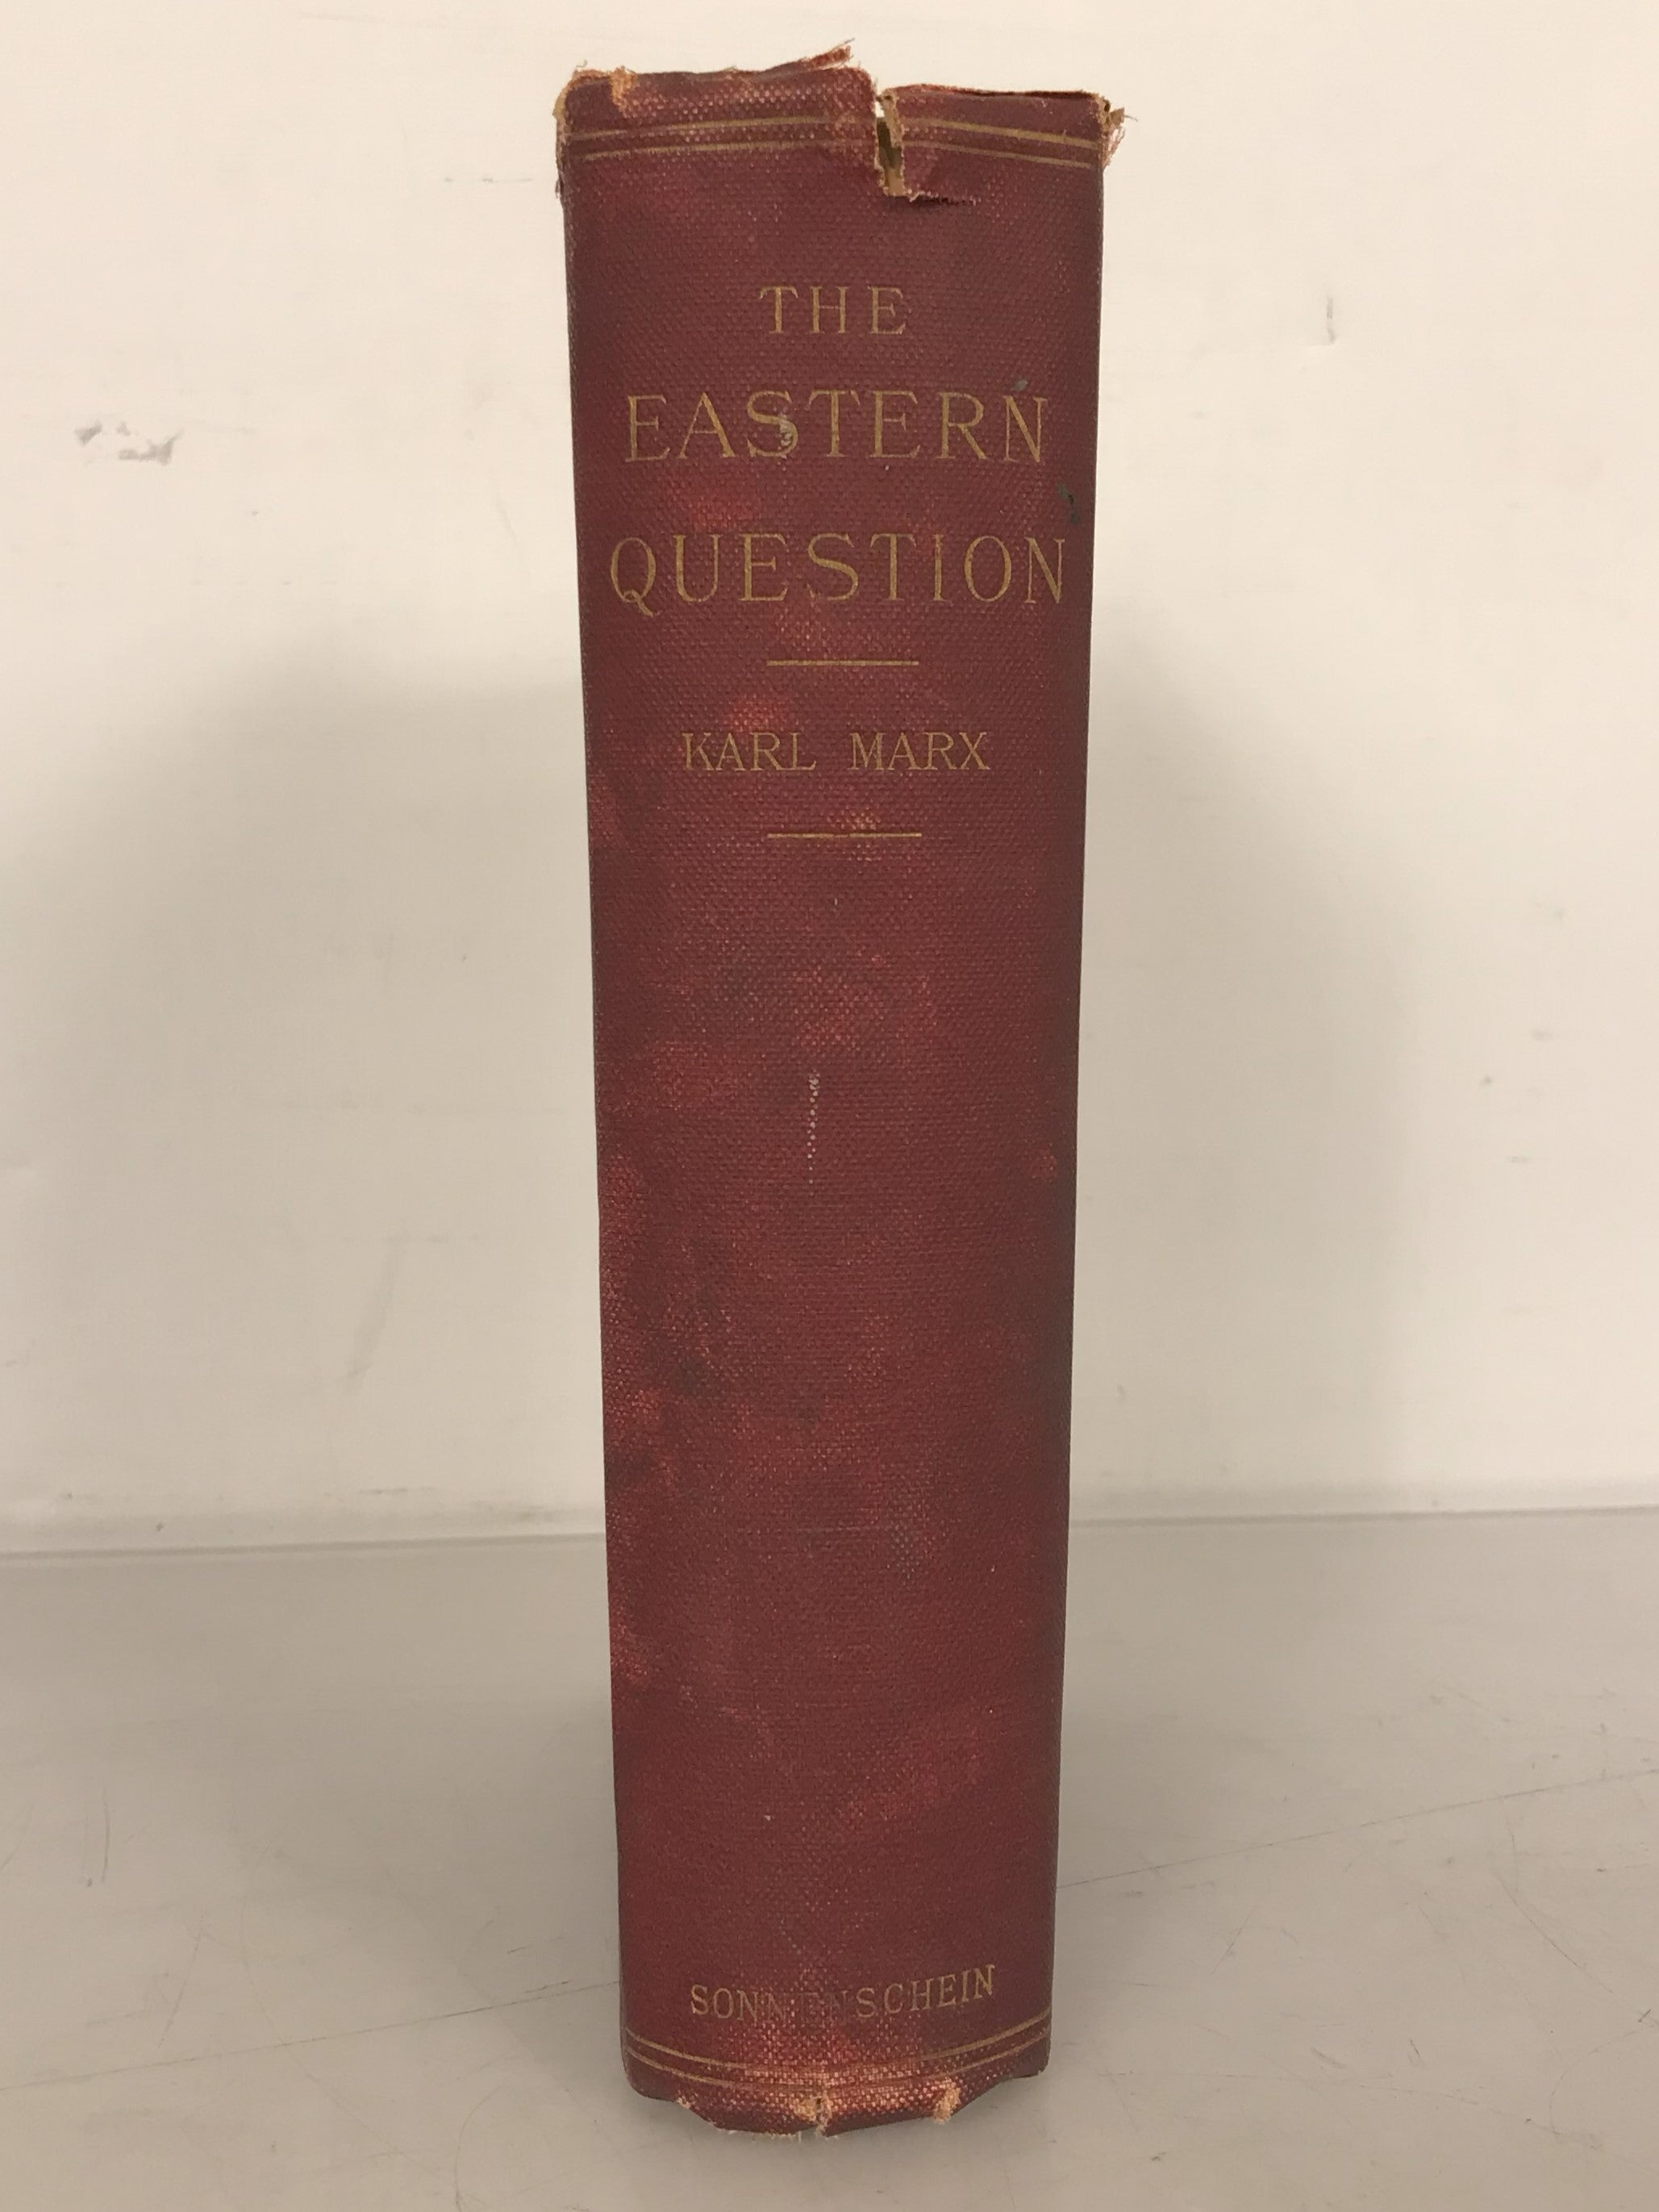 The Eastern Question by Karl Marx 1897 Includes Map